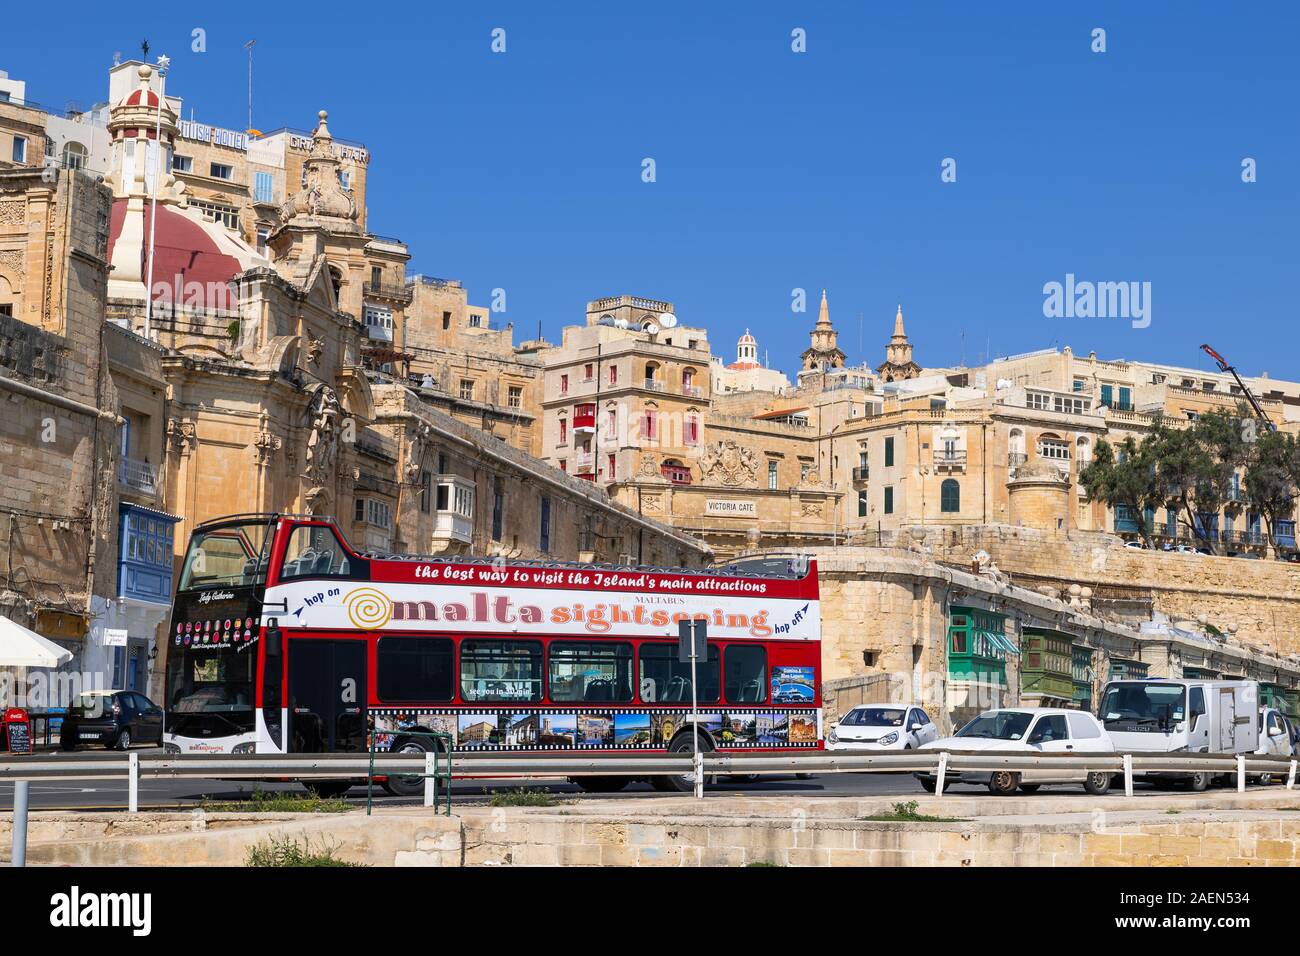 Valletta, Malta - October 11, 2019: Hop on hop off sightseeing bus on a tour in the capital city Stock Photo